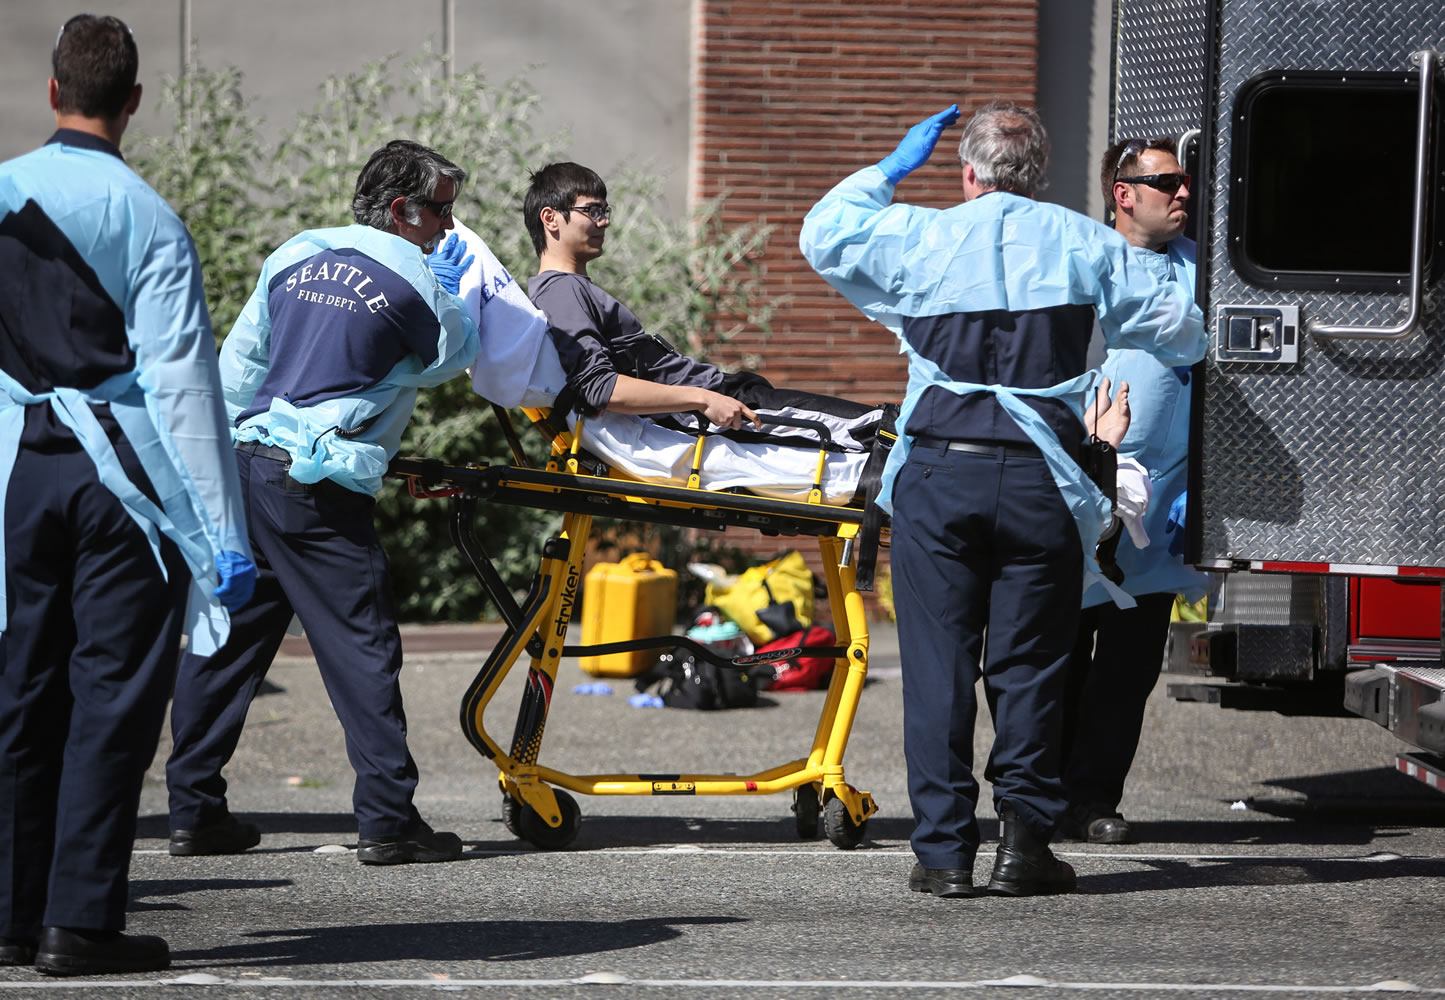 Jon Meis is taken from the shooting scene by medics Thursday at Seattle Pacific University.